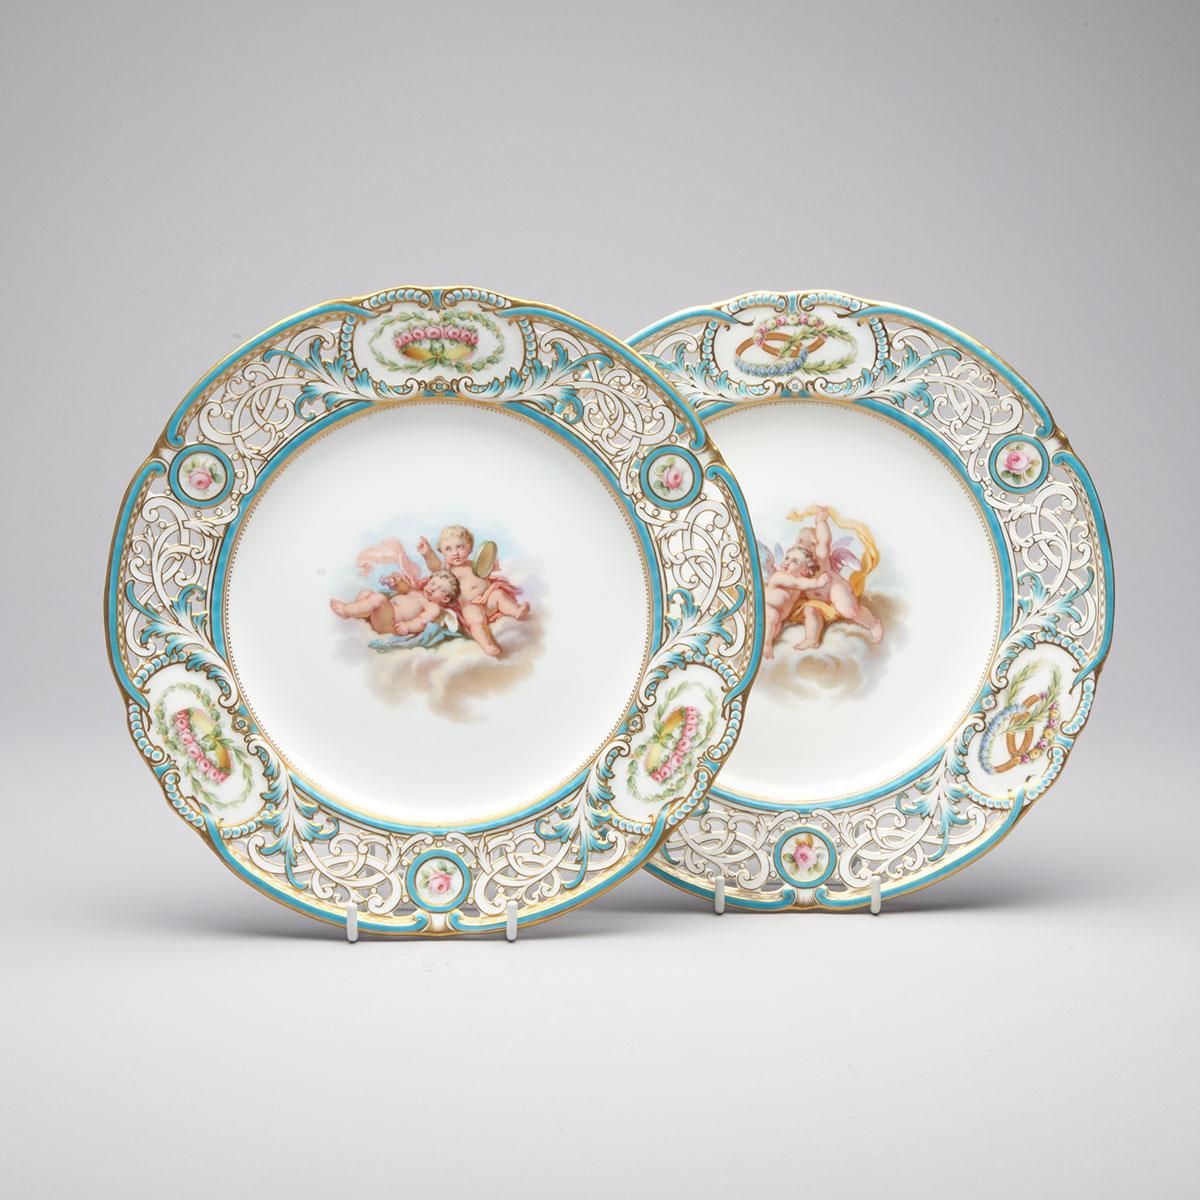 Pair of MInton Reticulated Plates, 1860